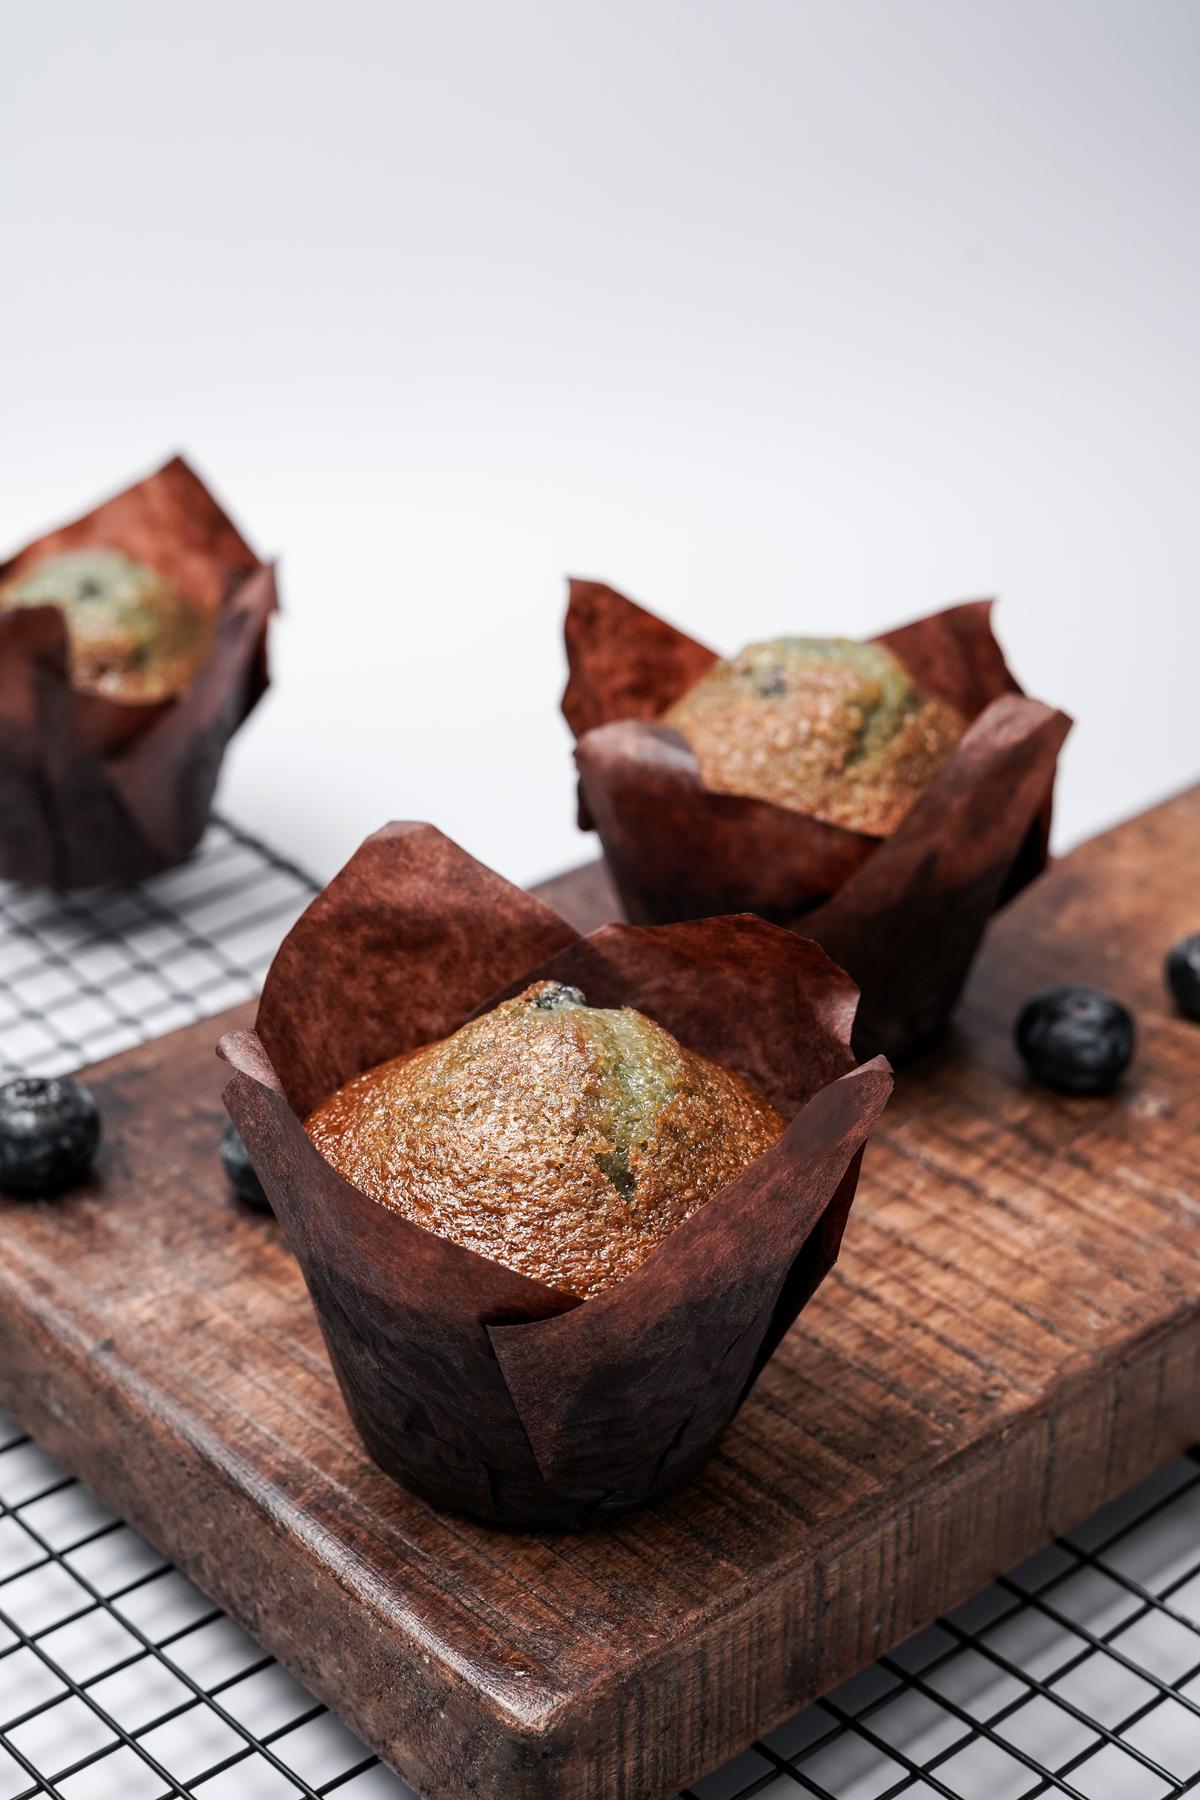 Blueberry muffins at the newly-opened La Forno Cafe in Thiruvananthapuram 